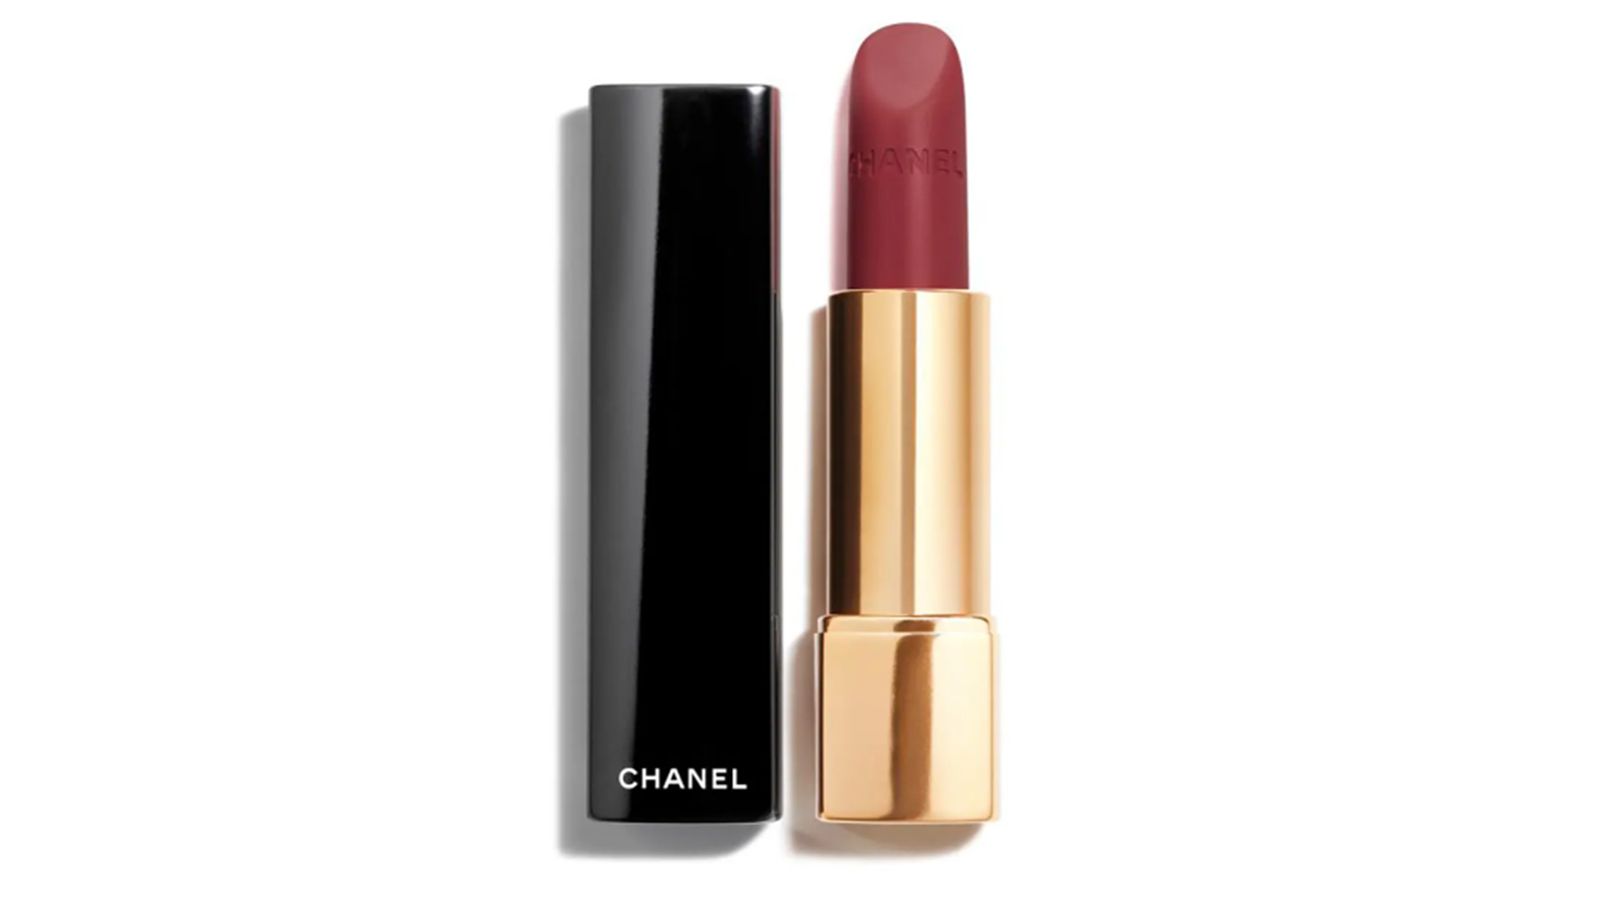 Chanel Rouge Allure Velvet lipstick 34 La Raffinee review, swatches,  comparison - Cosmetopia Digest Beauty and Makeup Blog